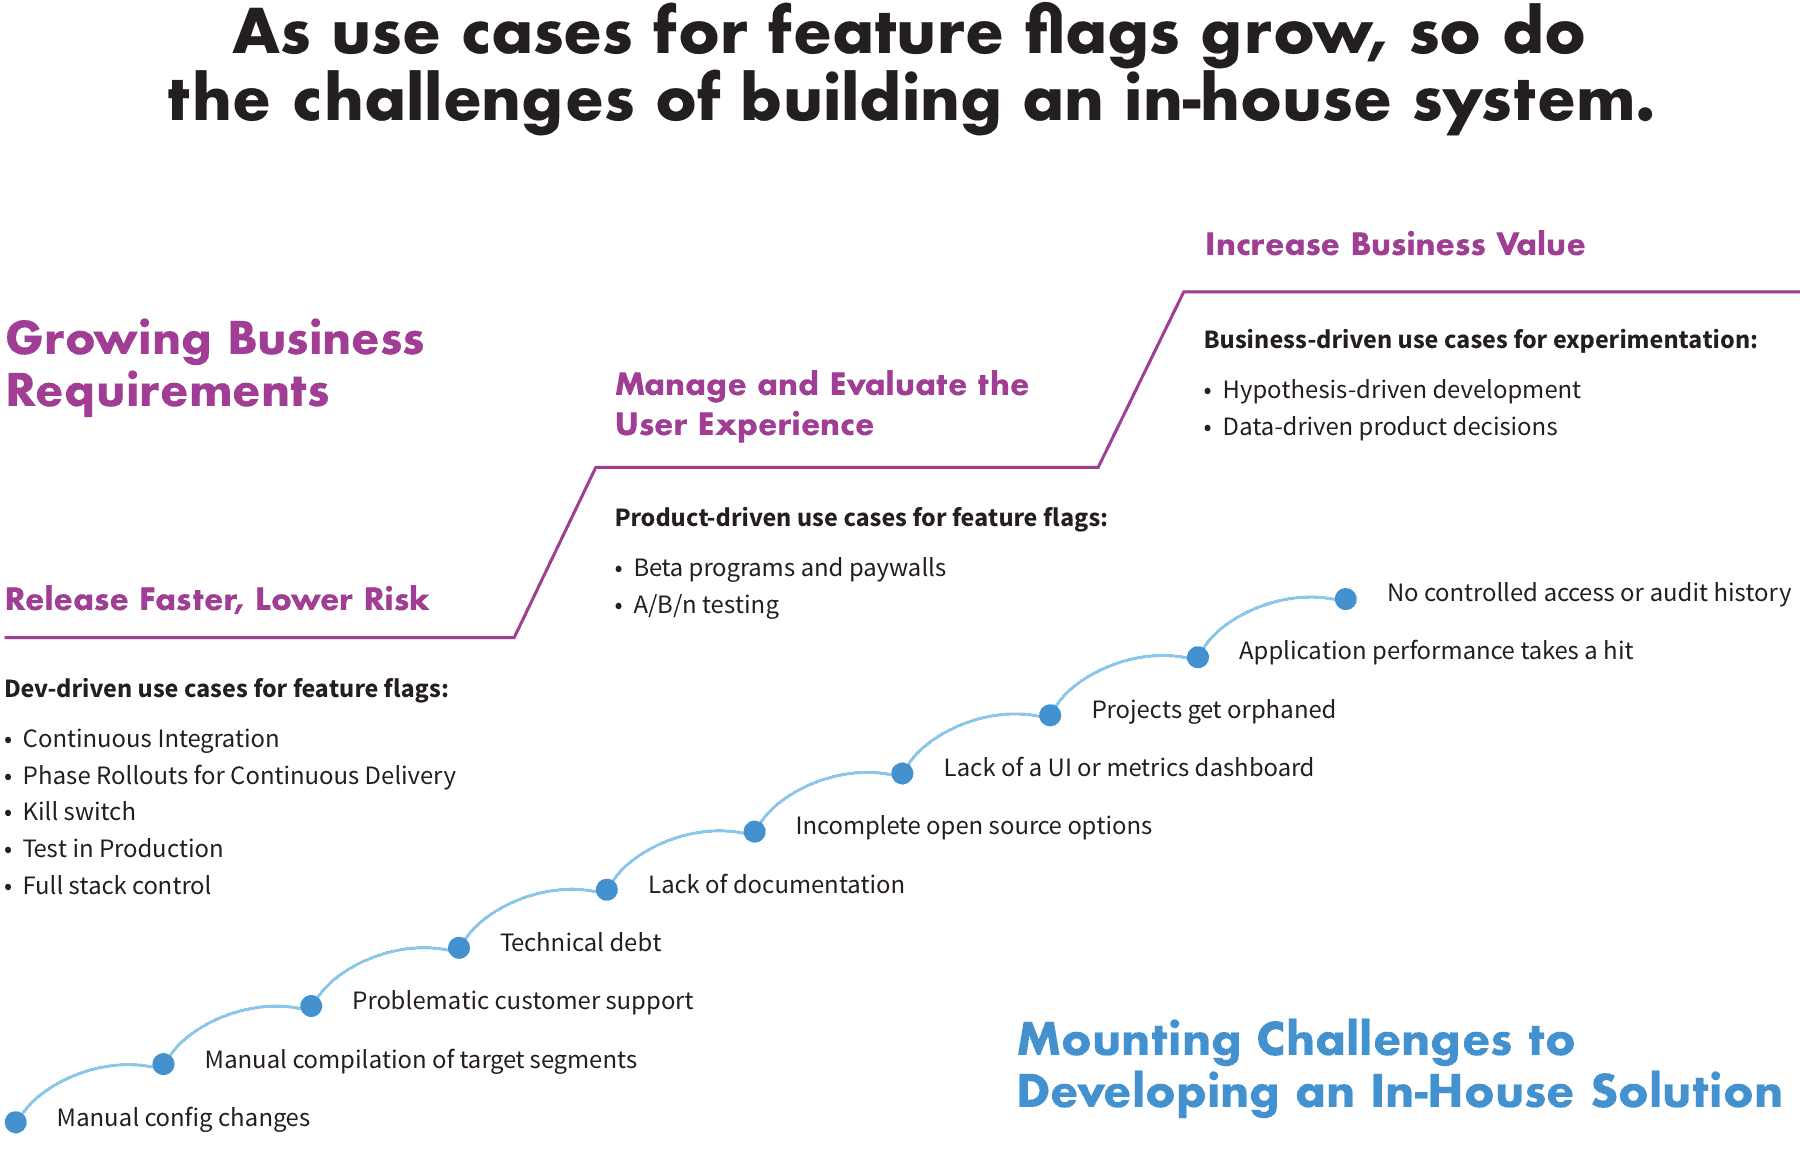 As use cases for feature flags grow, so do the challenges of building an in-house system.